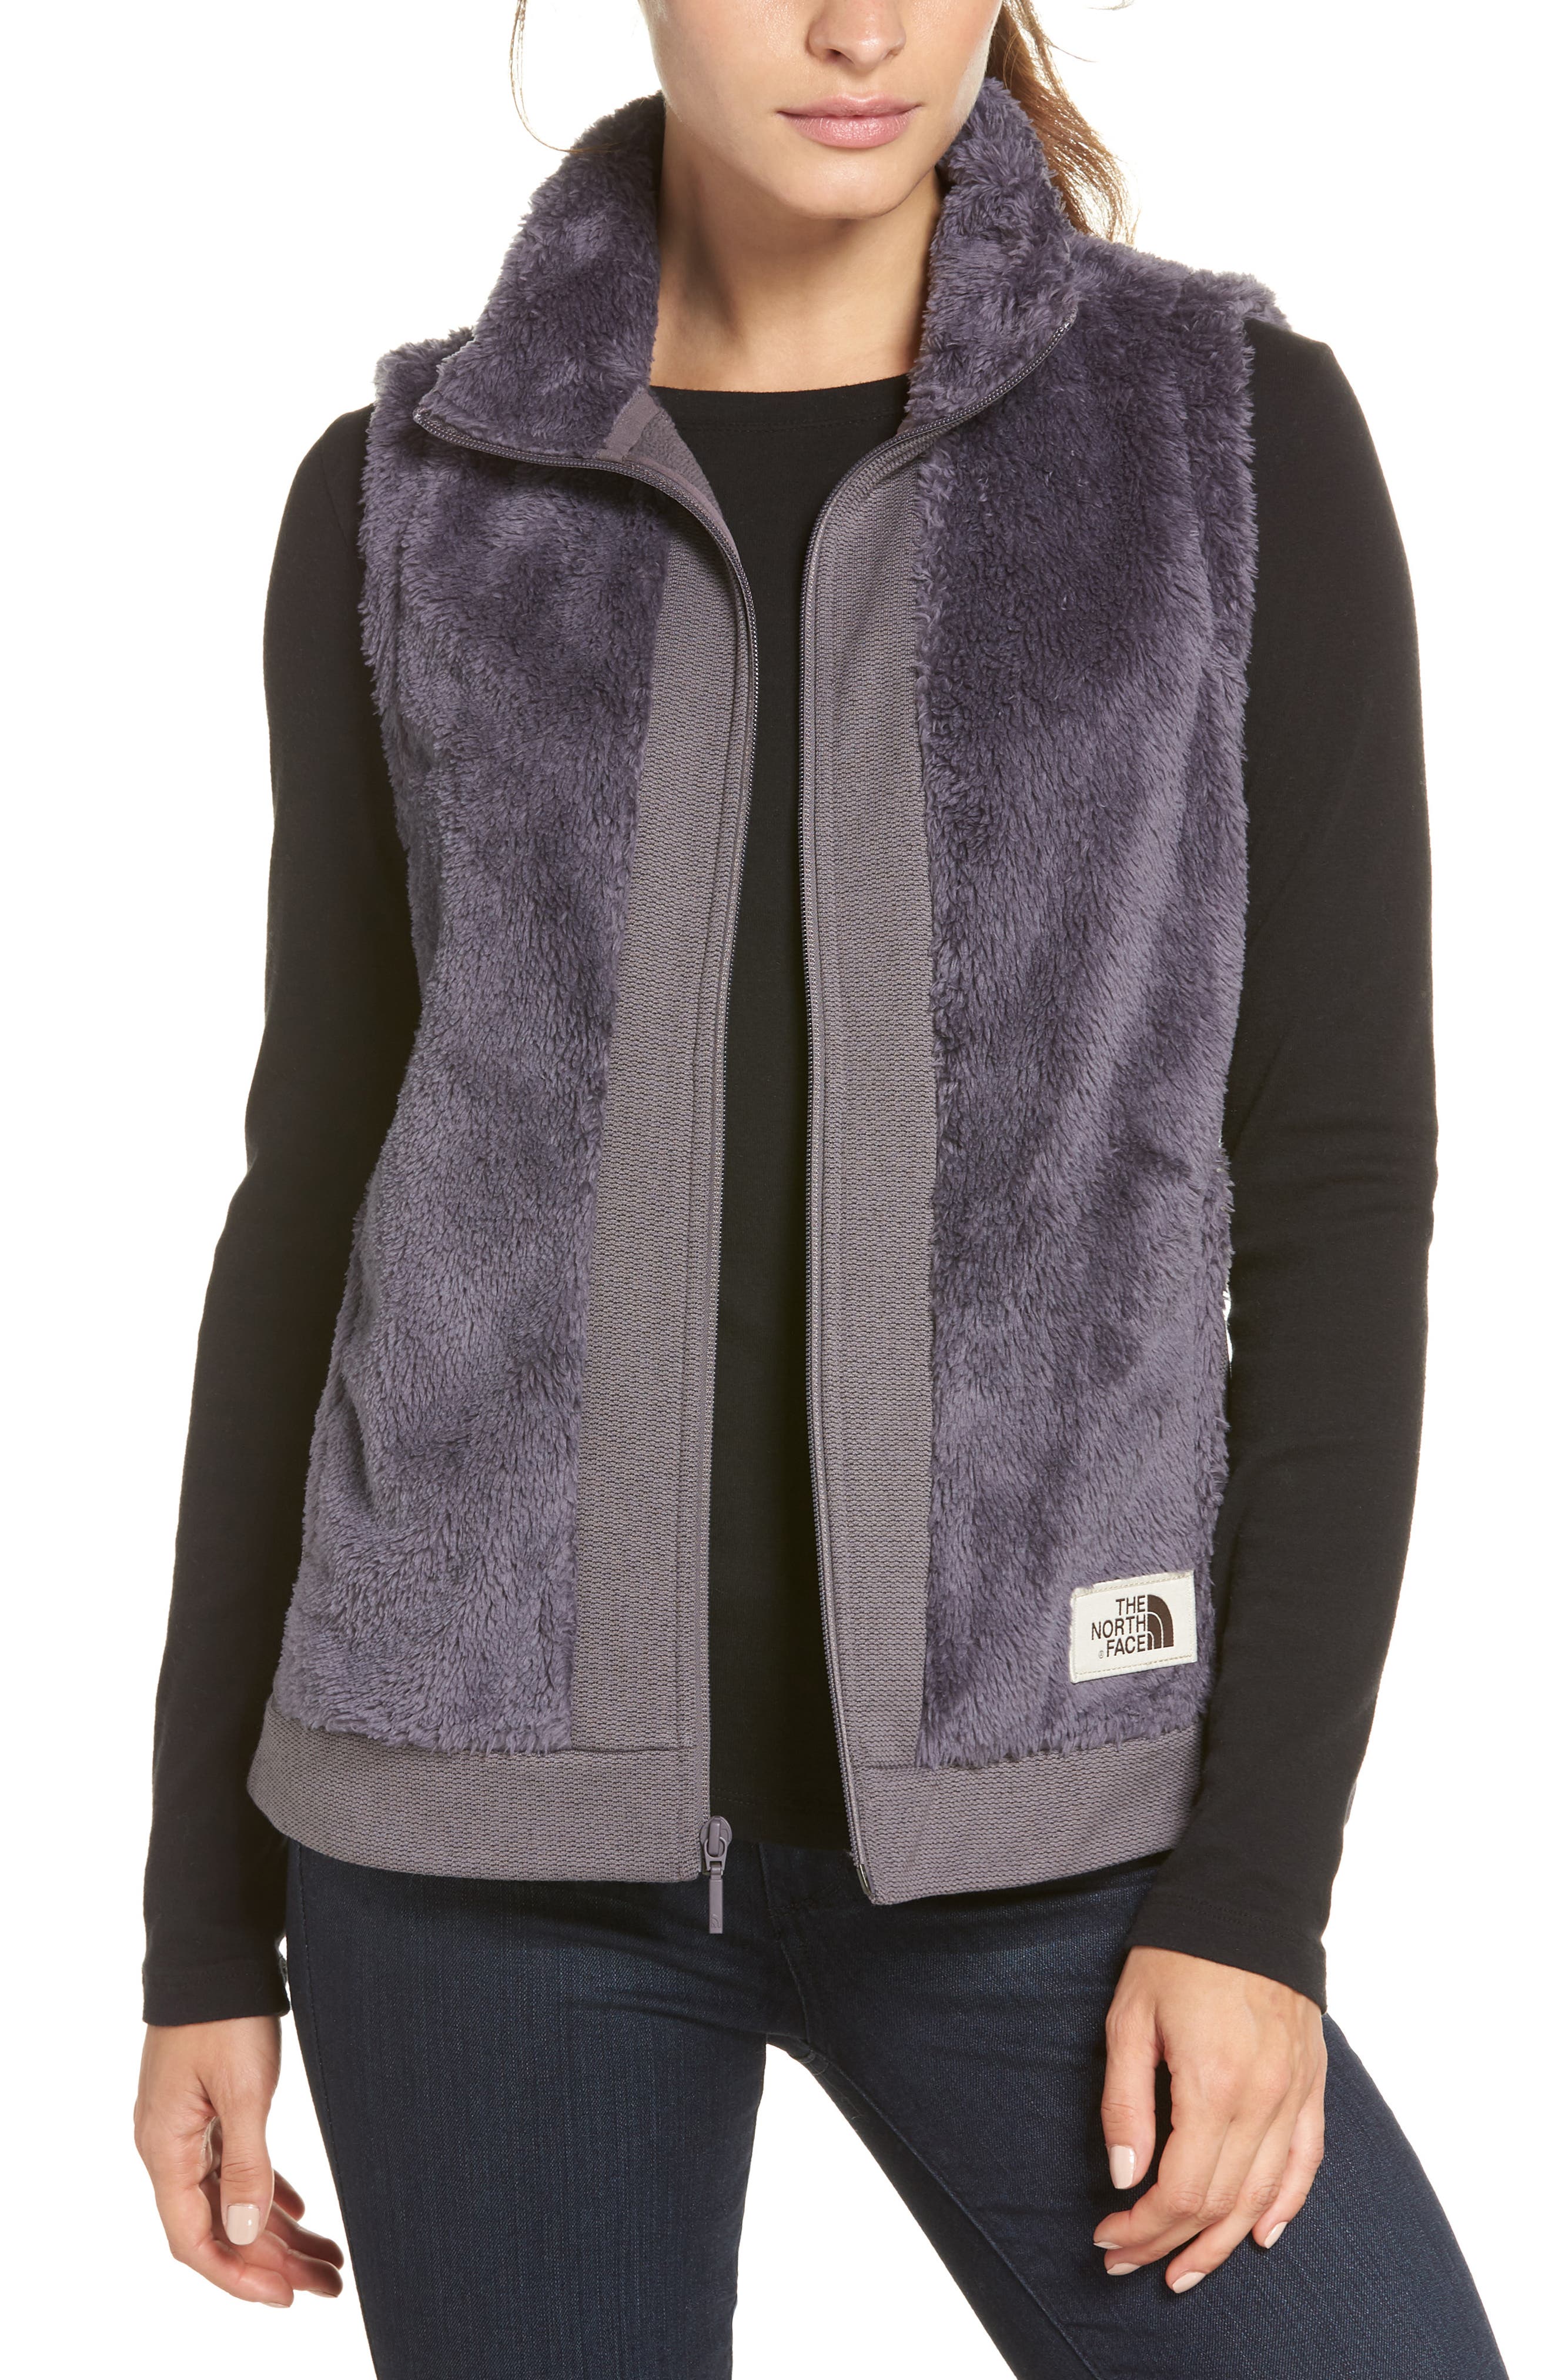 north face fuzzy vest